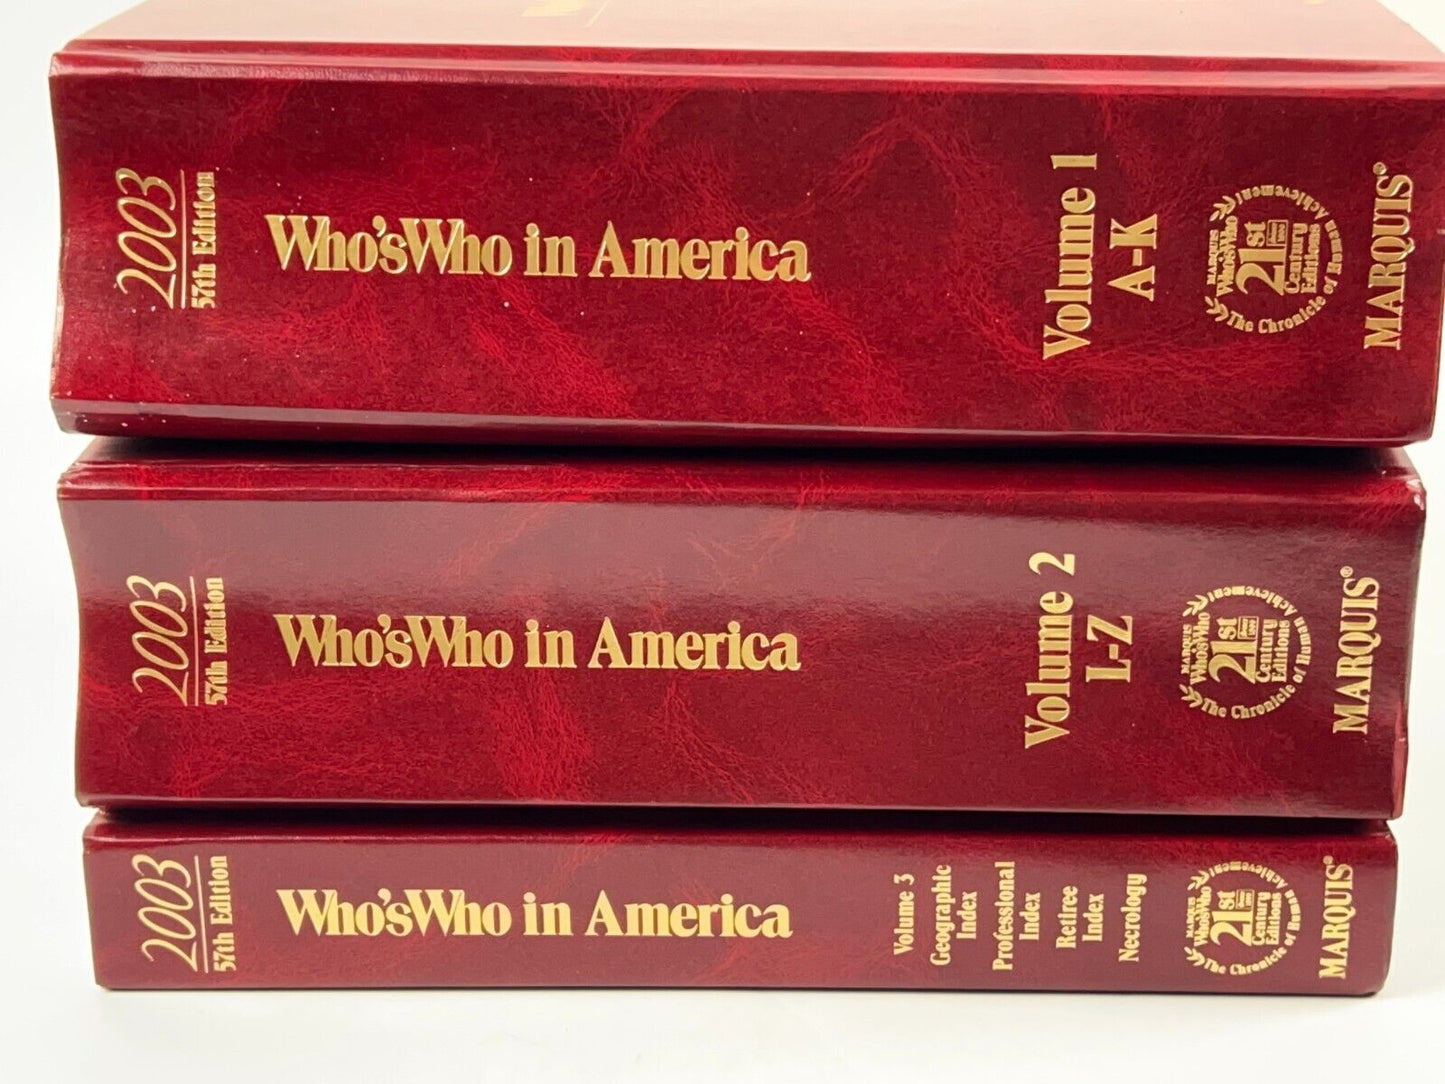 Who s Who in America 2003 Vol. 1-3